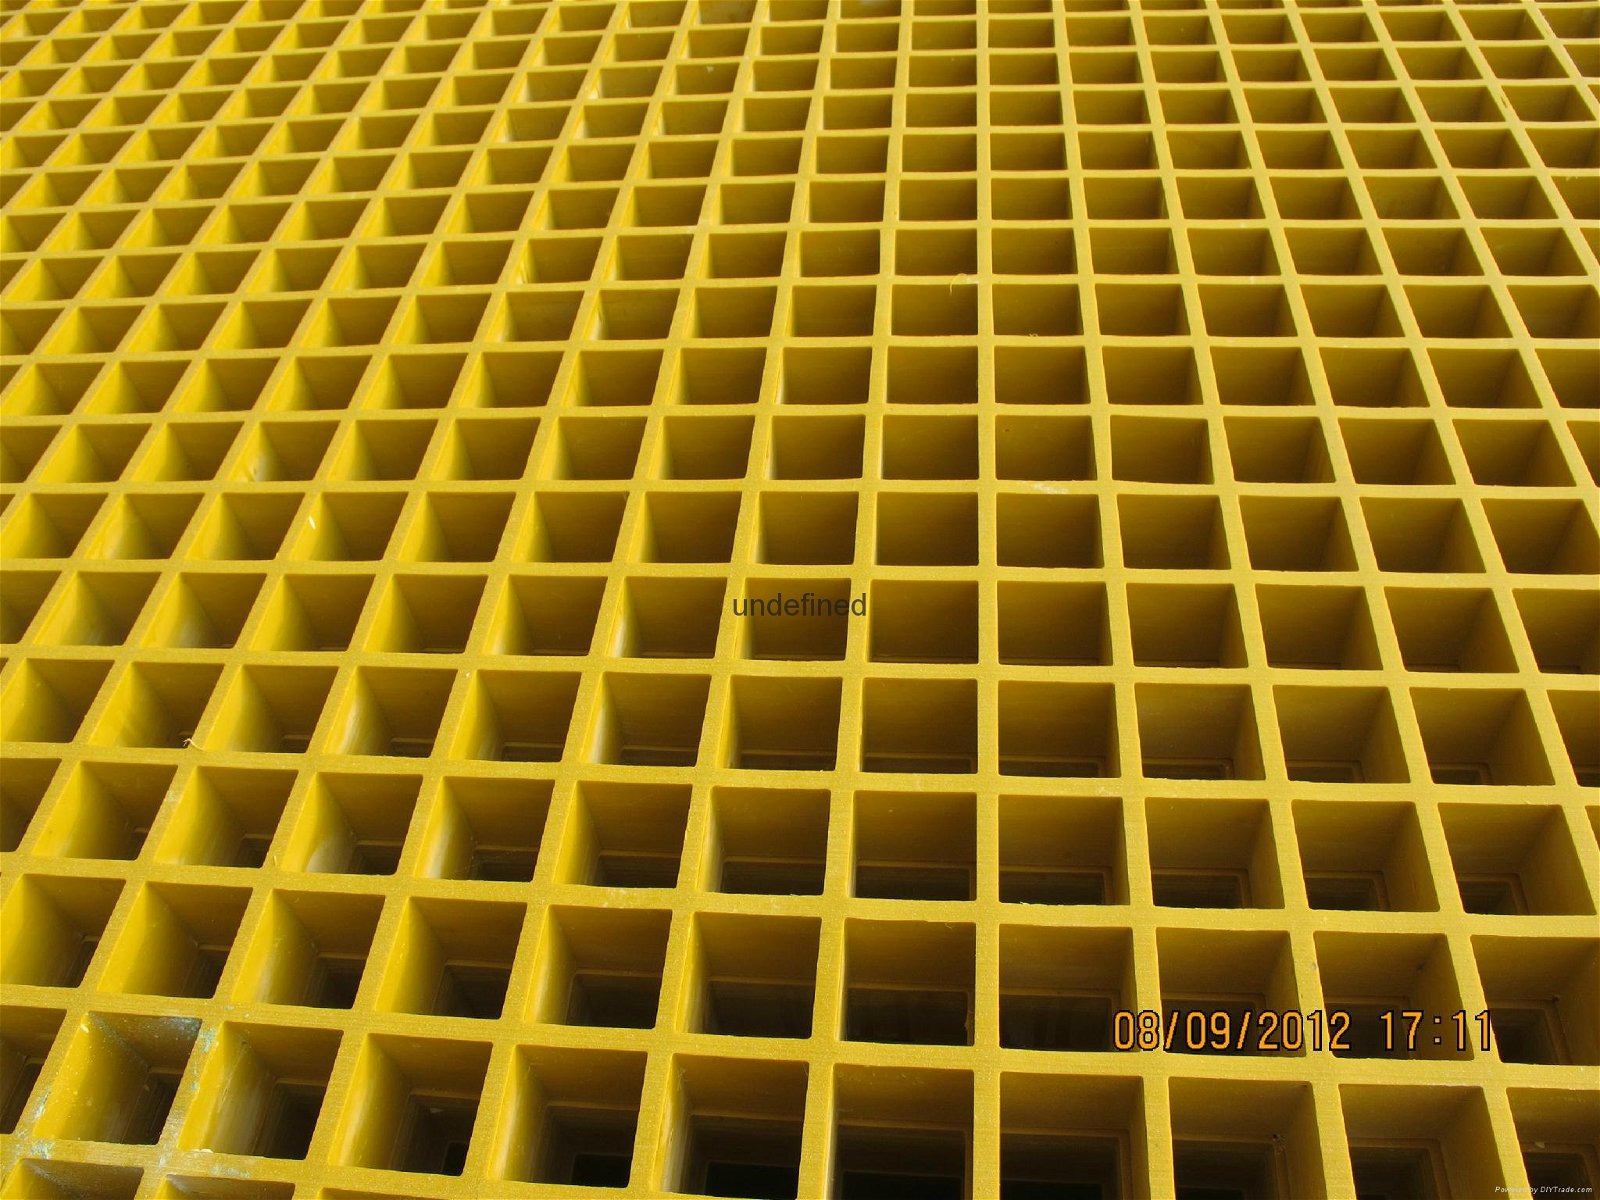 DURABLE , CONVENIENT Frp grating for frp tree pool cover 4